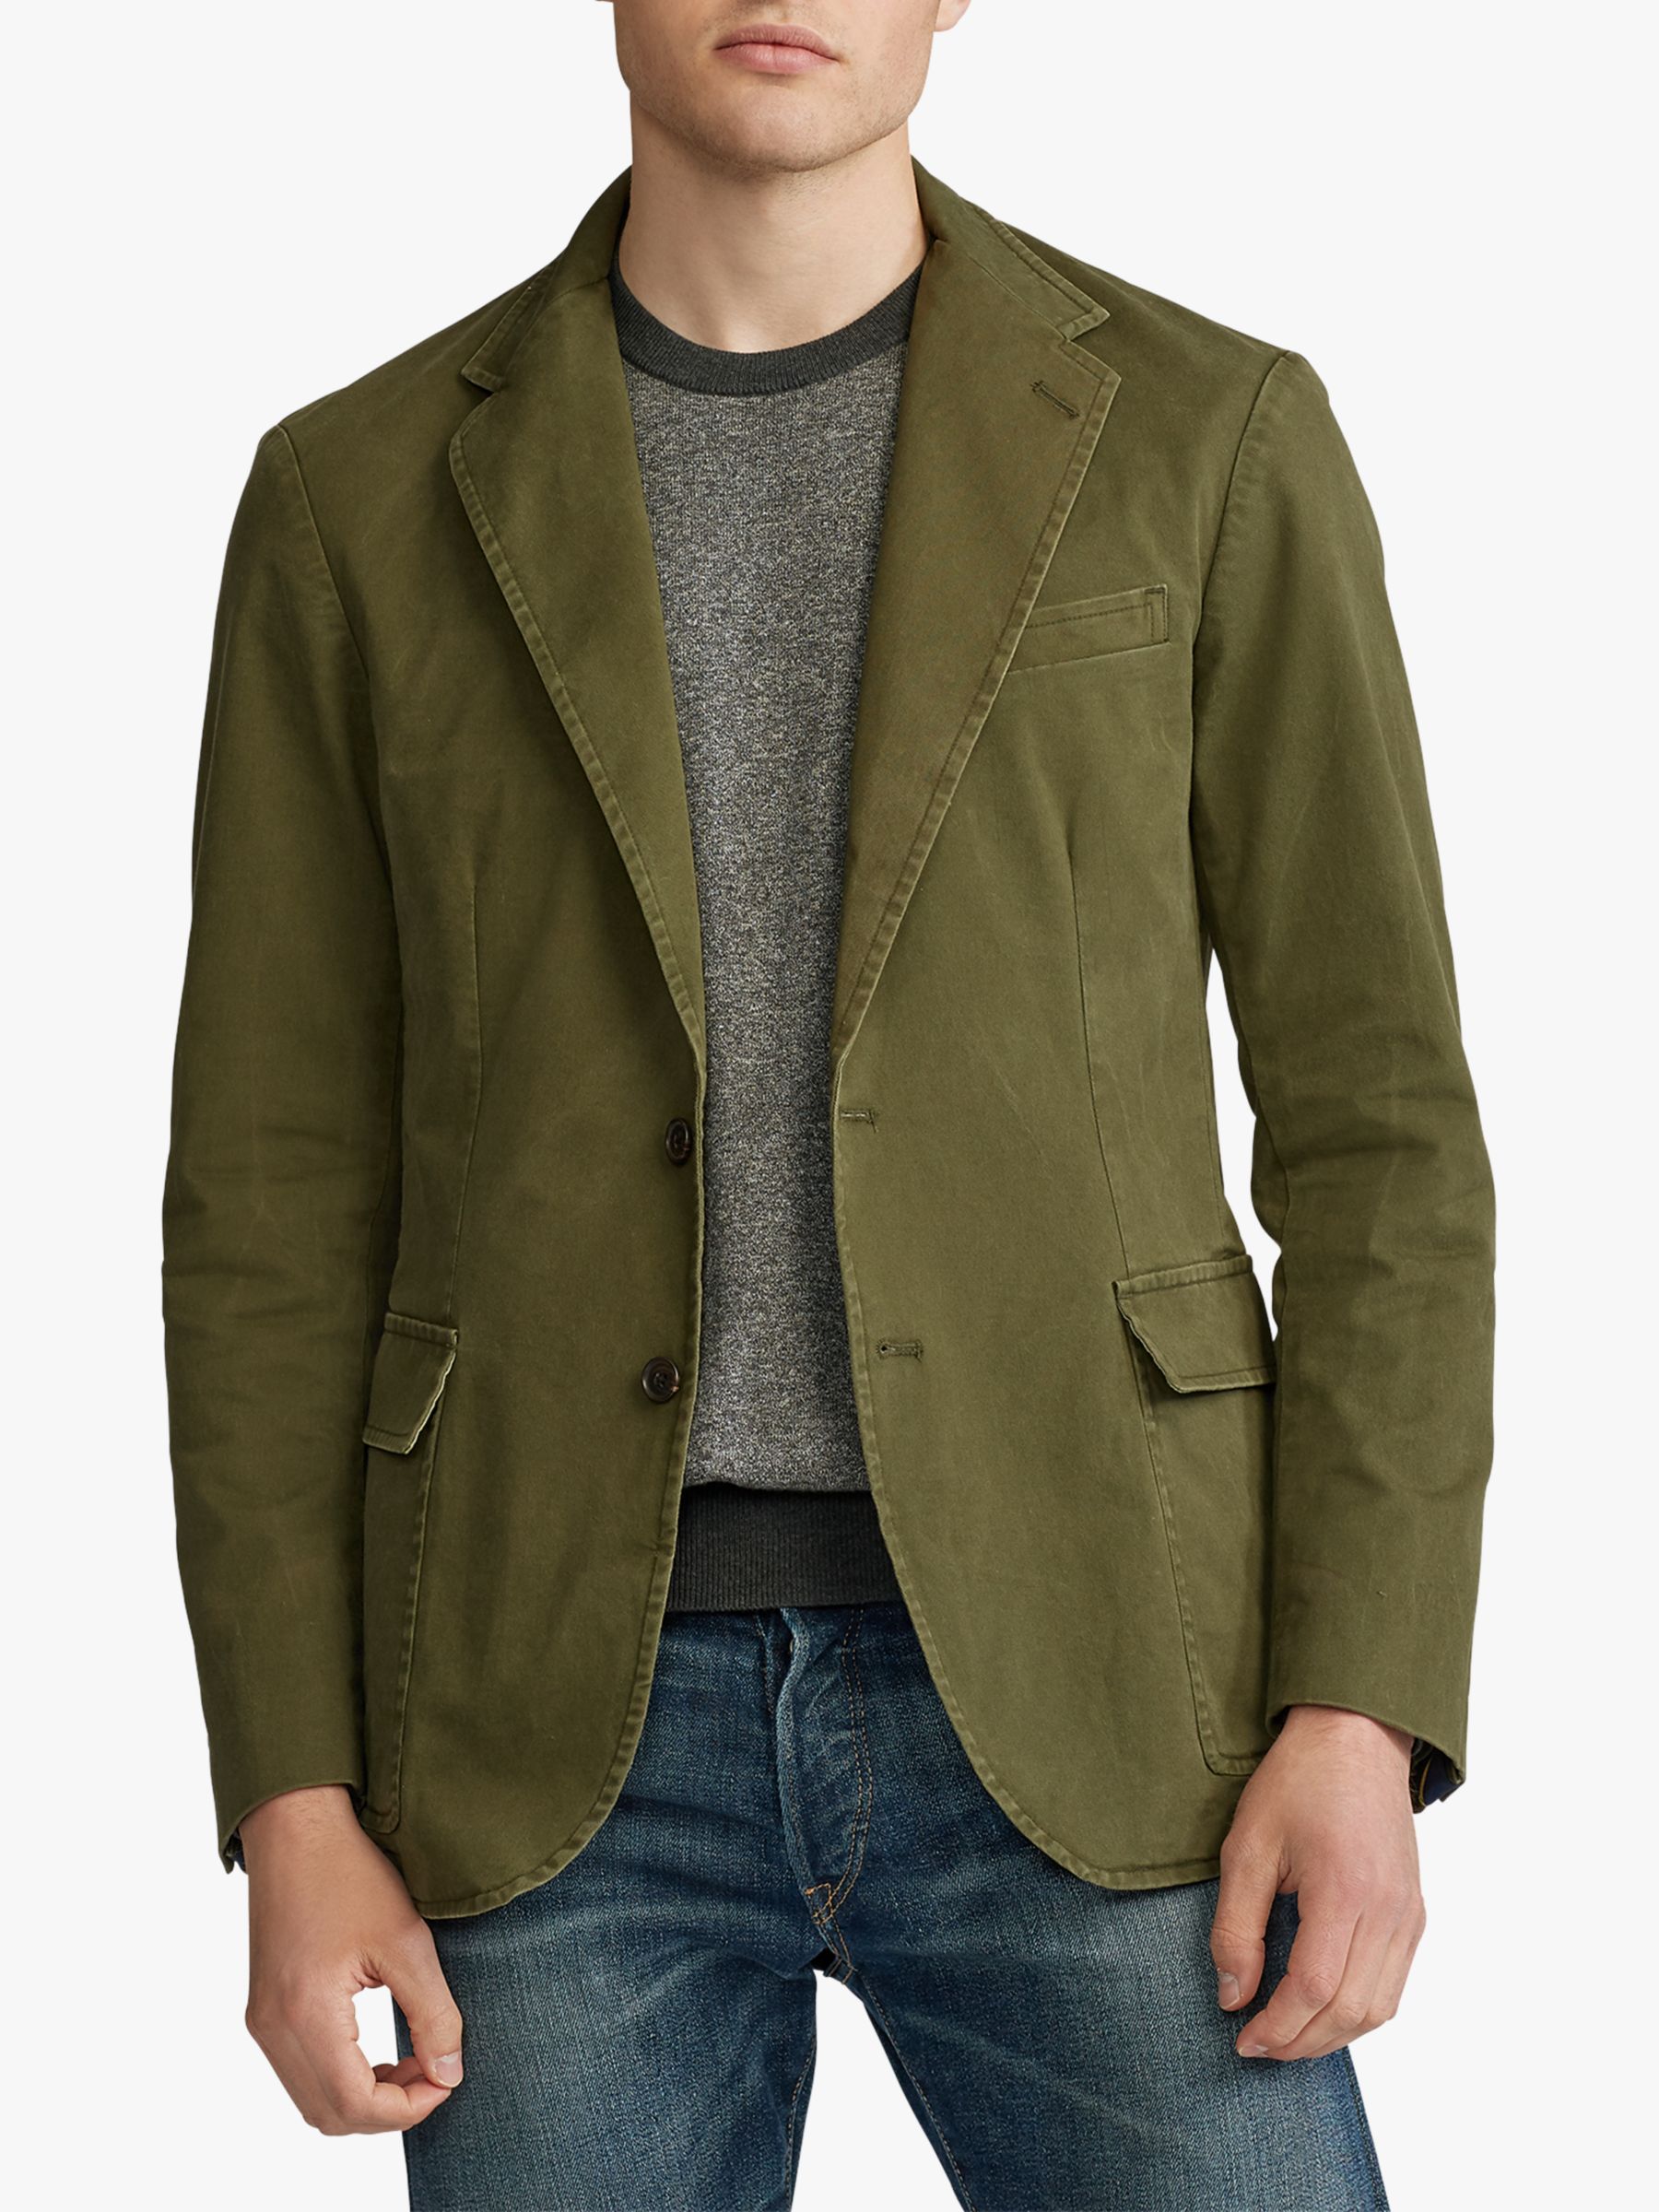 Polo Ralph Lauren Cotton Stretch Chino Jacket, Company Olive, S